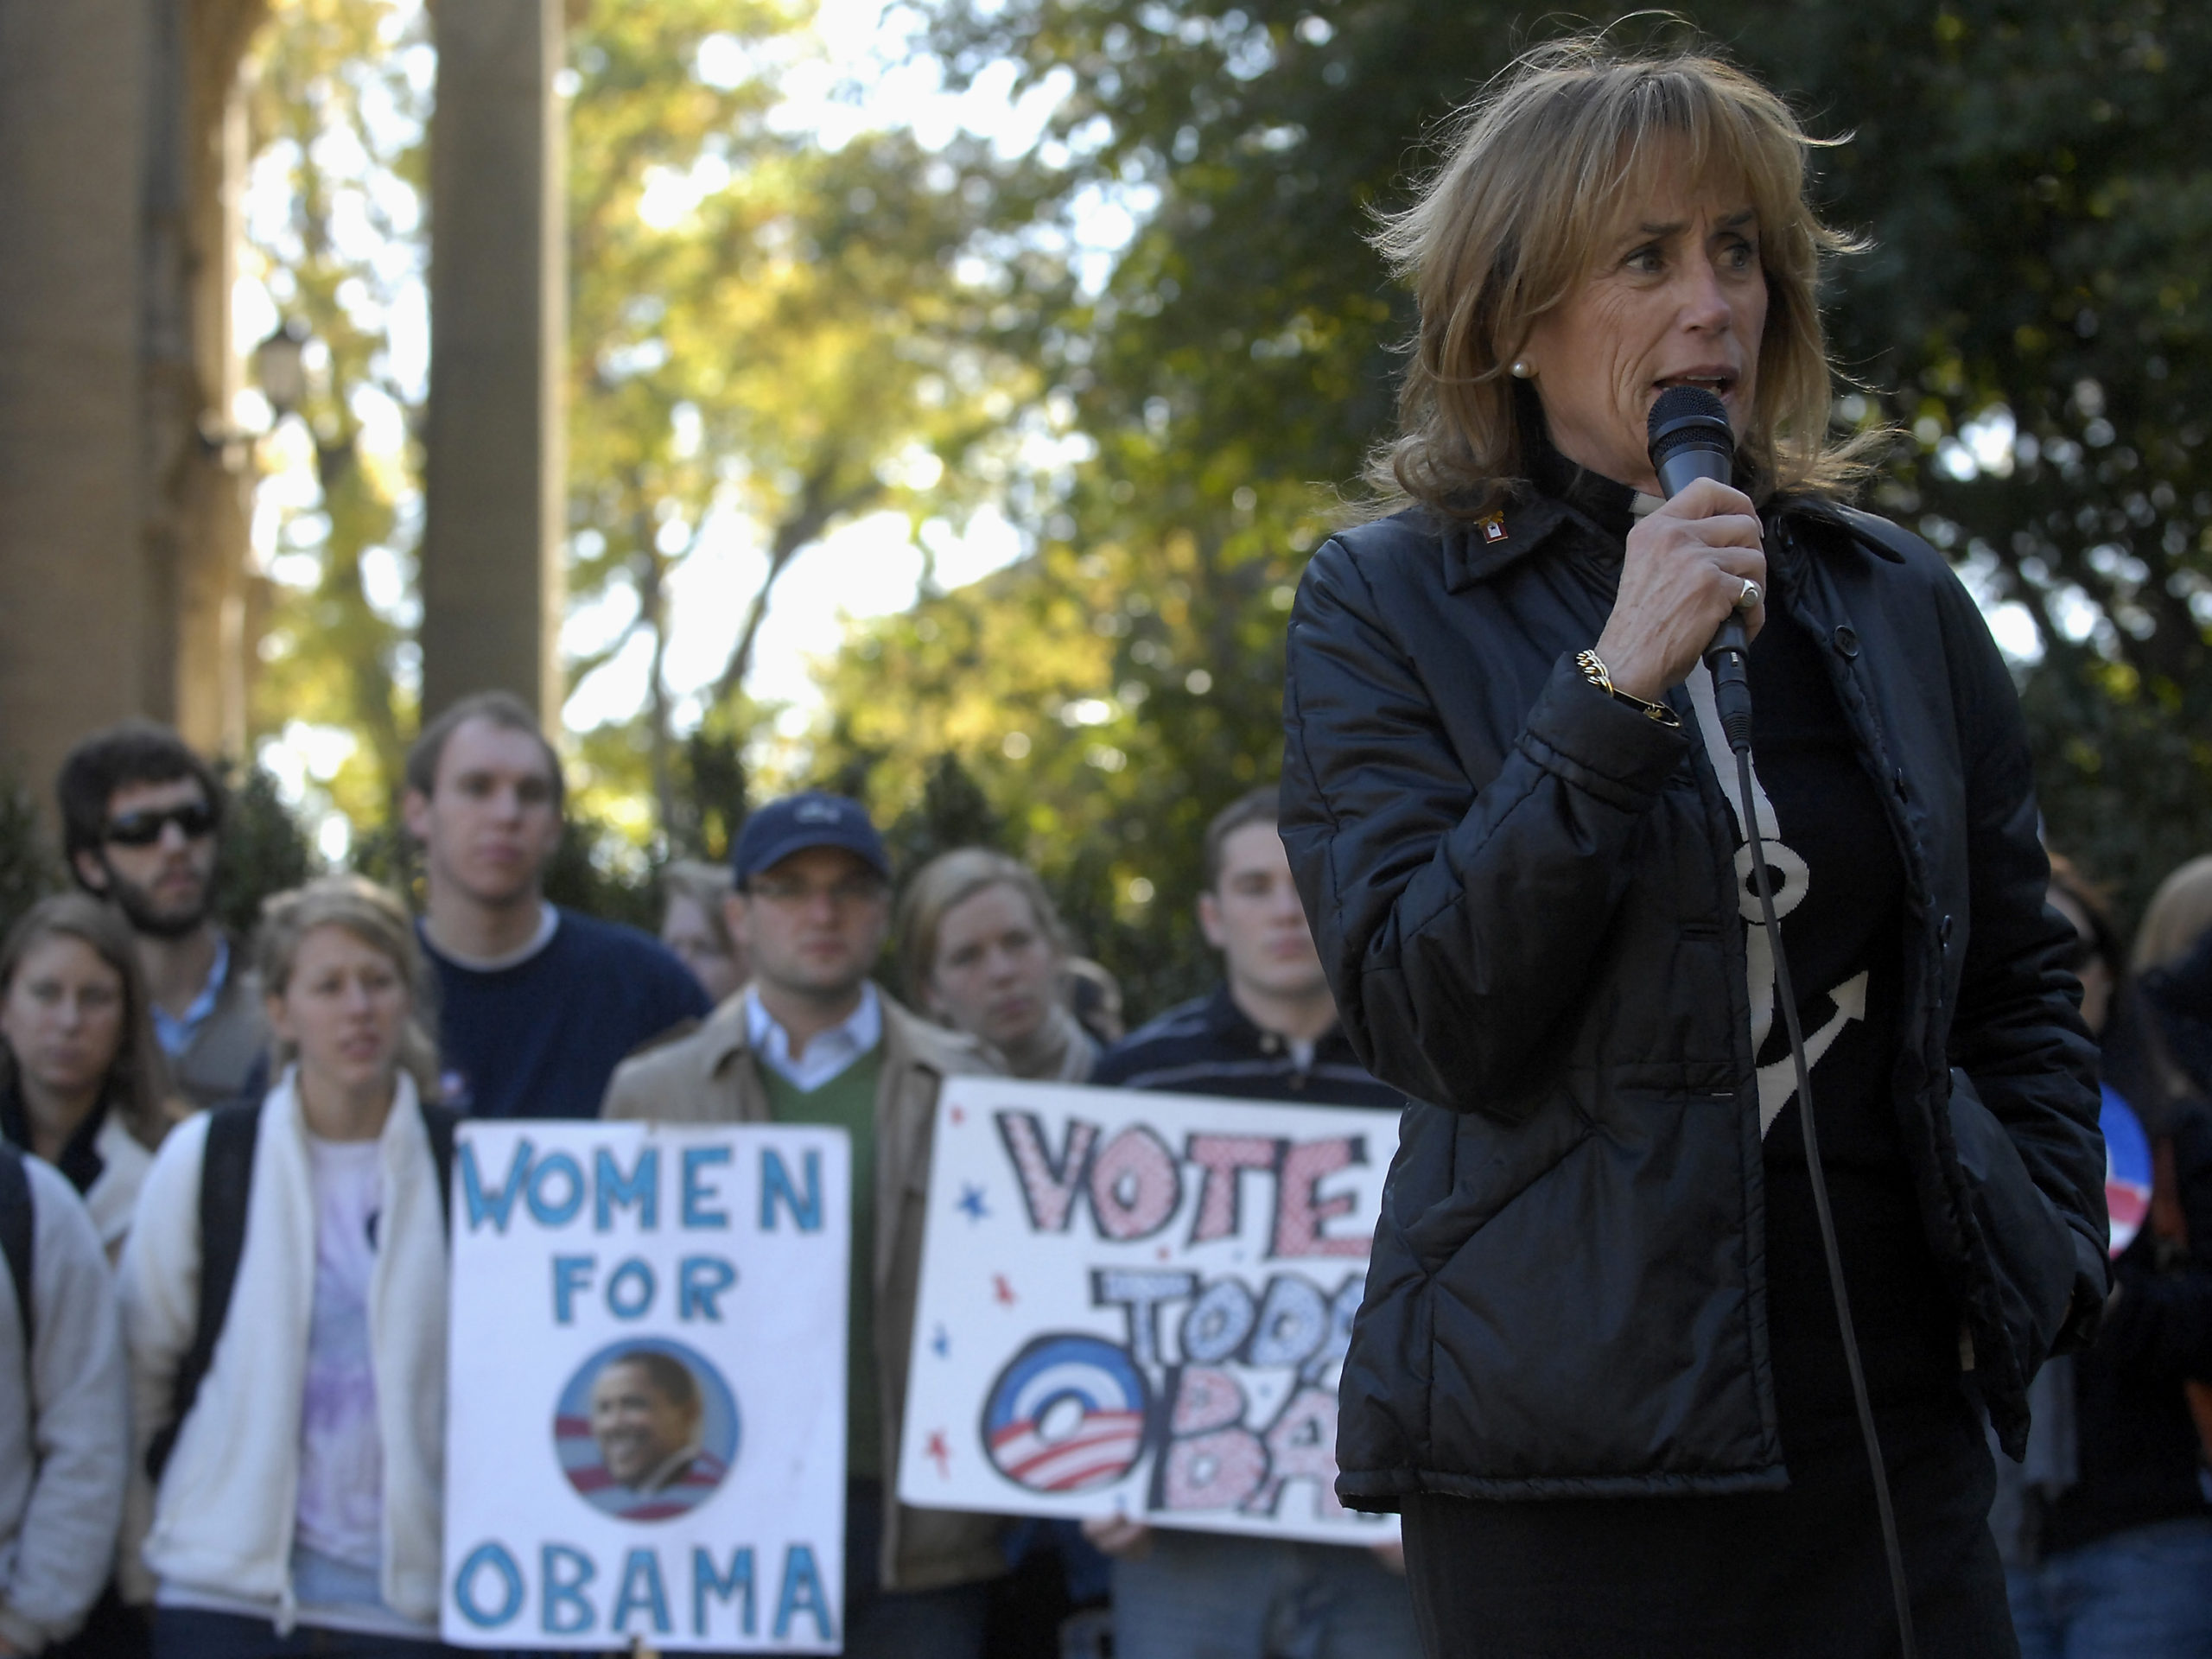 Valerie Biden Owens, sister of Democratic vice presidential candidate Joe Biden, campaigns for Democratic presidential candidate Barack Obama at the University of North Carolina on October 30, 2008 in Chapel Hill, North Carolina. (Photo by Sara D. Davis/Getty Images)